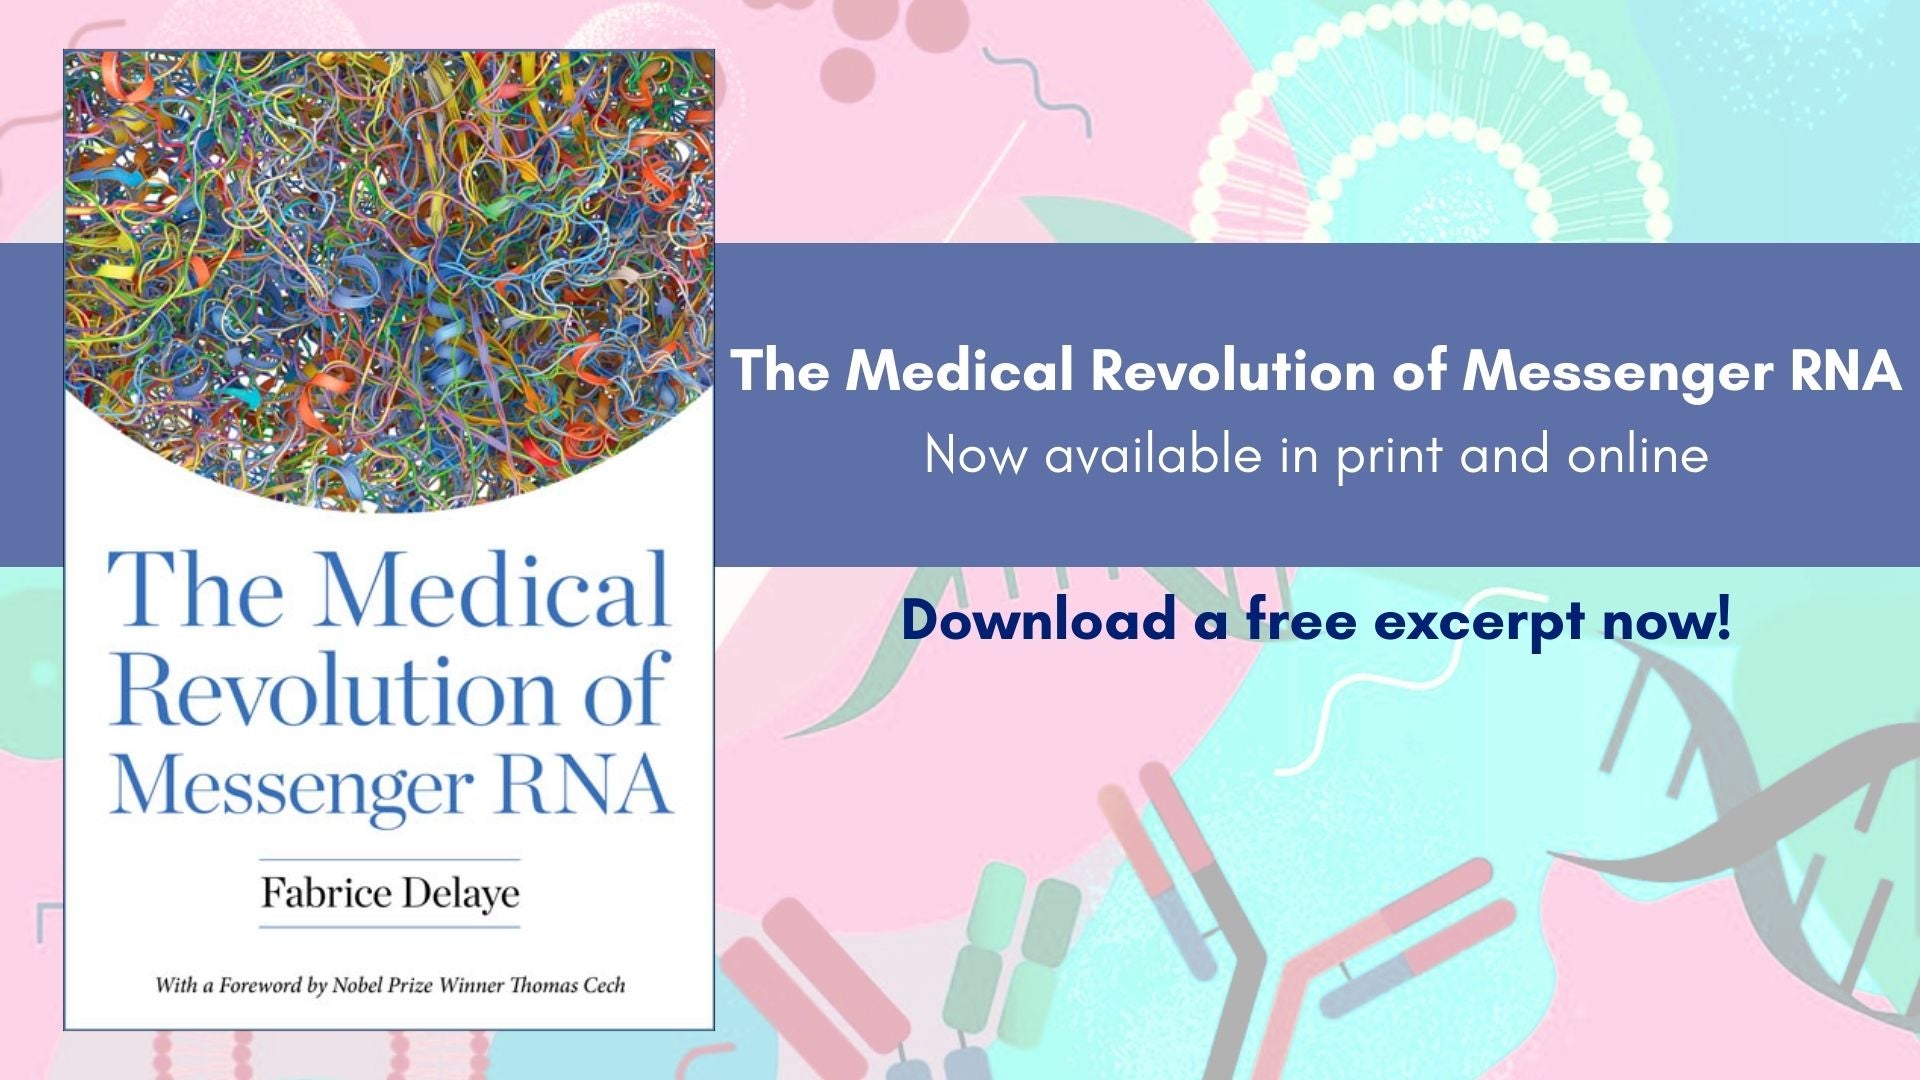 image of the medical revolution of messenger RNA book cover